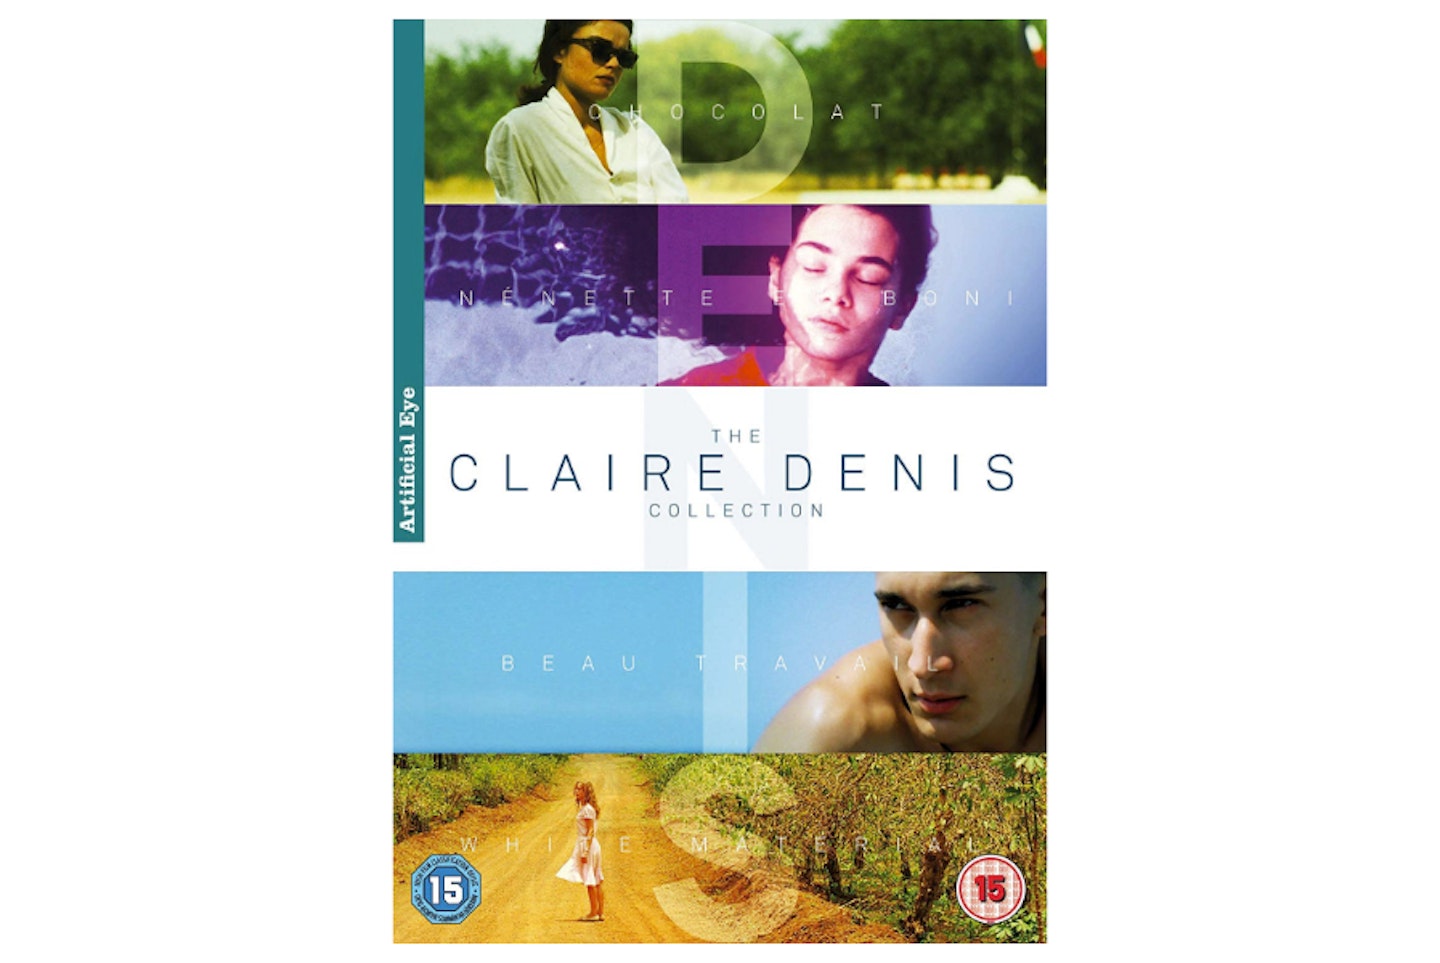 The Claire Denis Collection